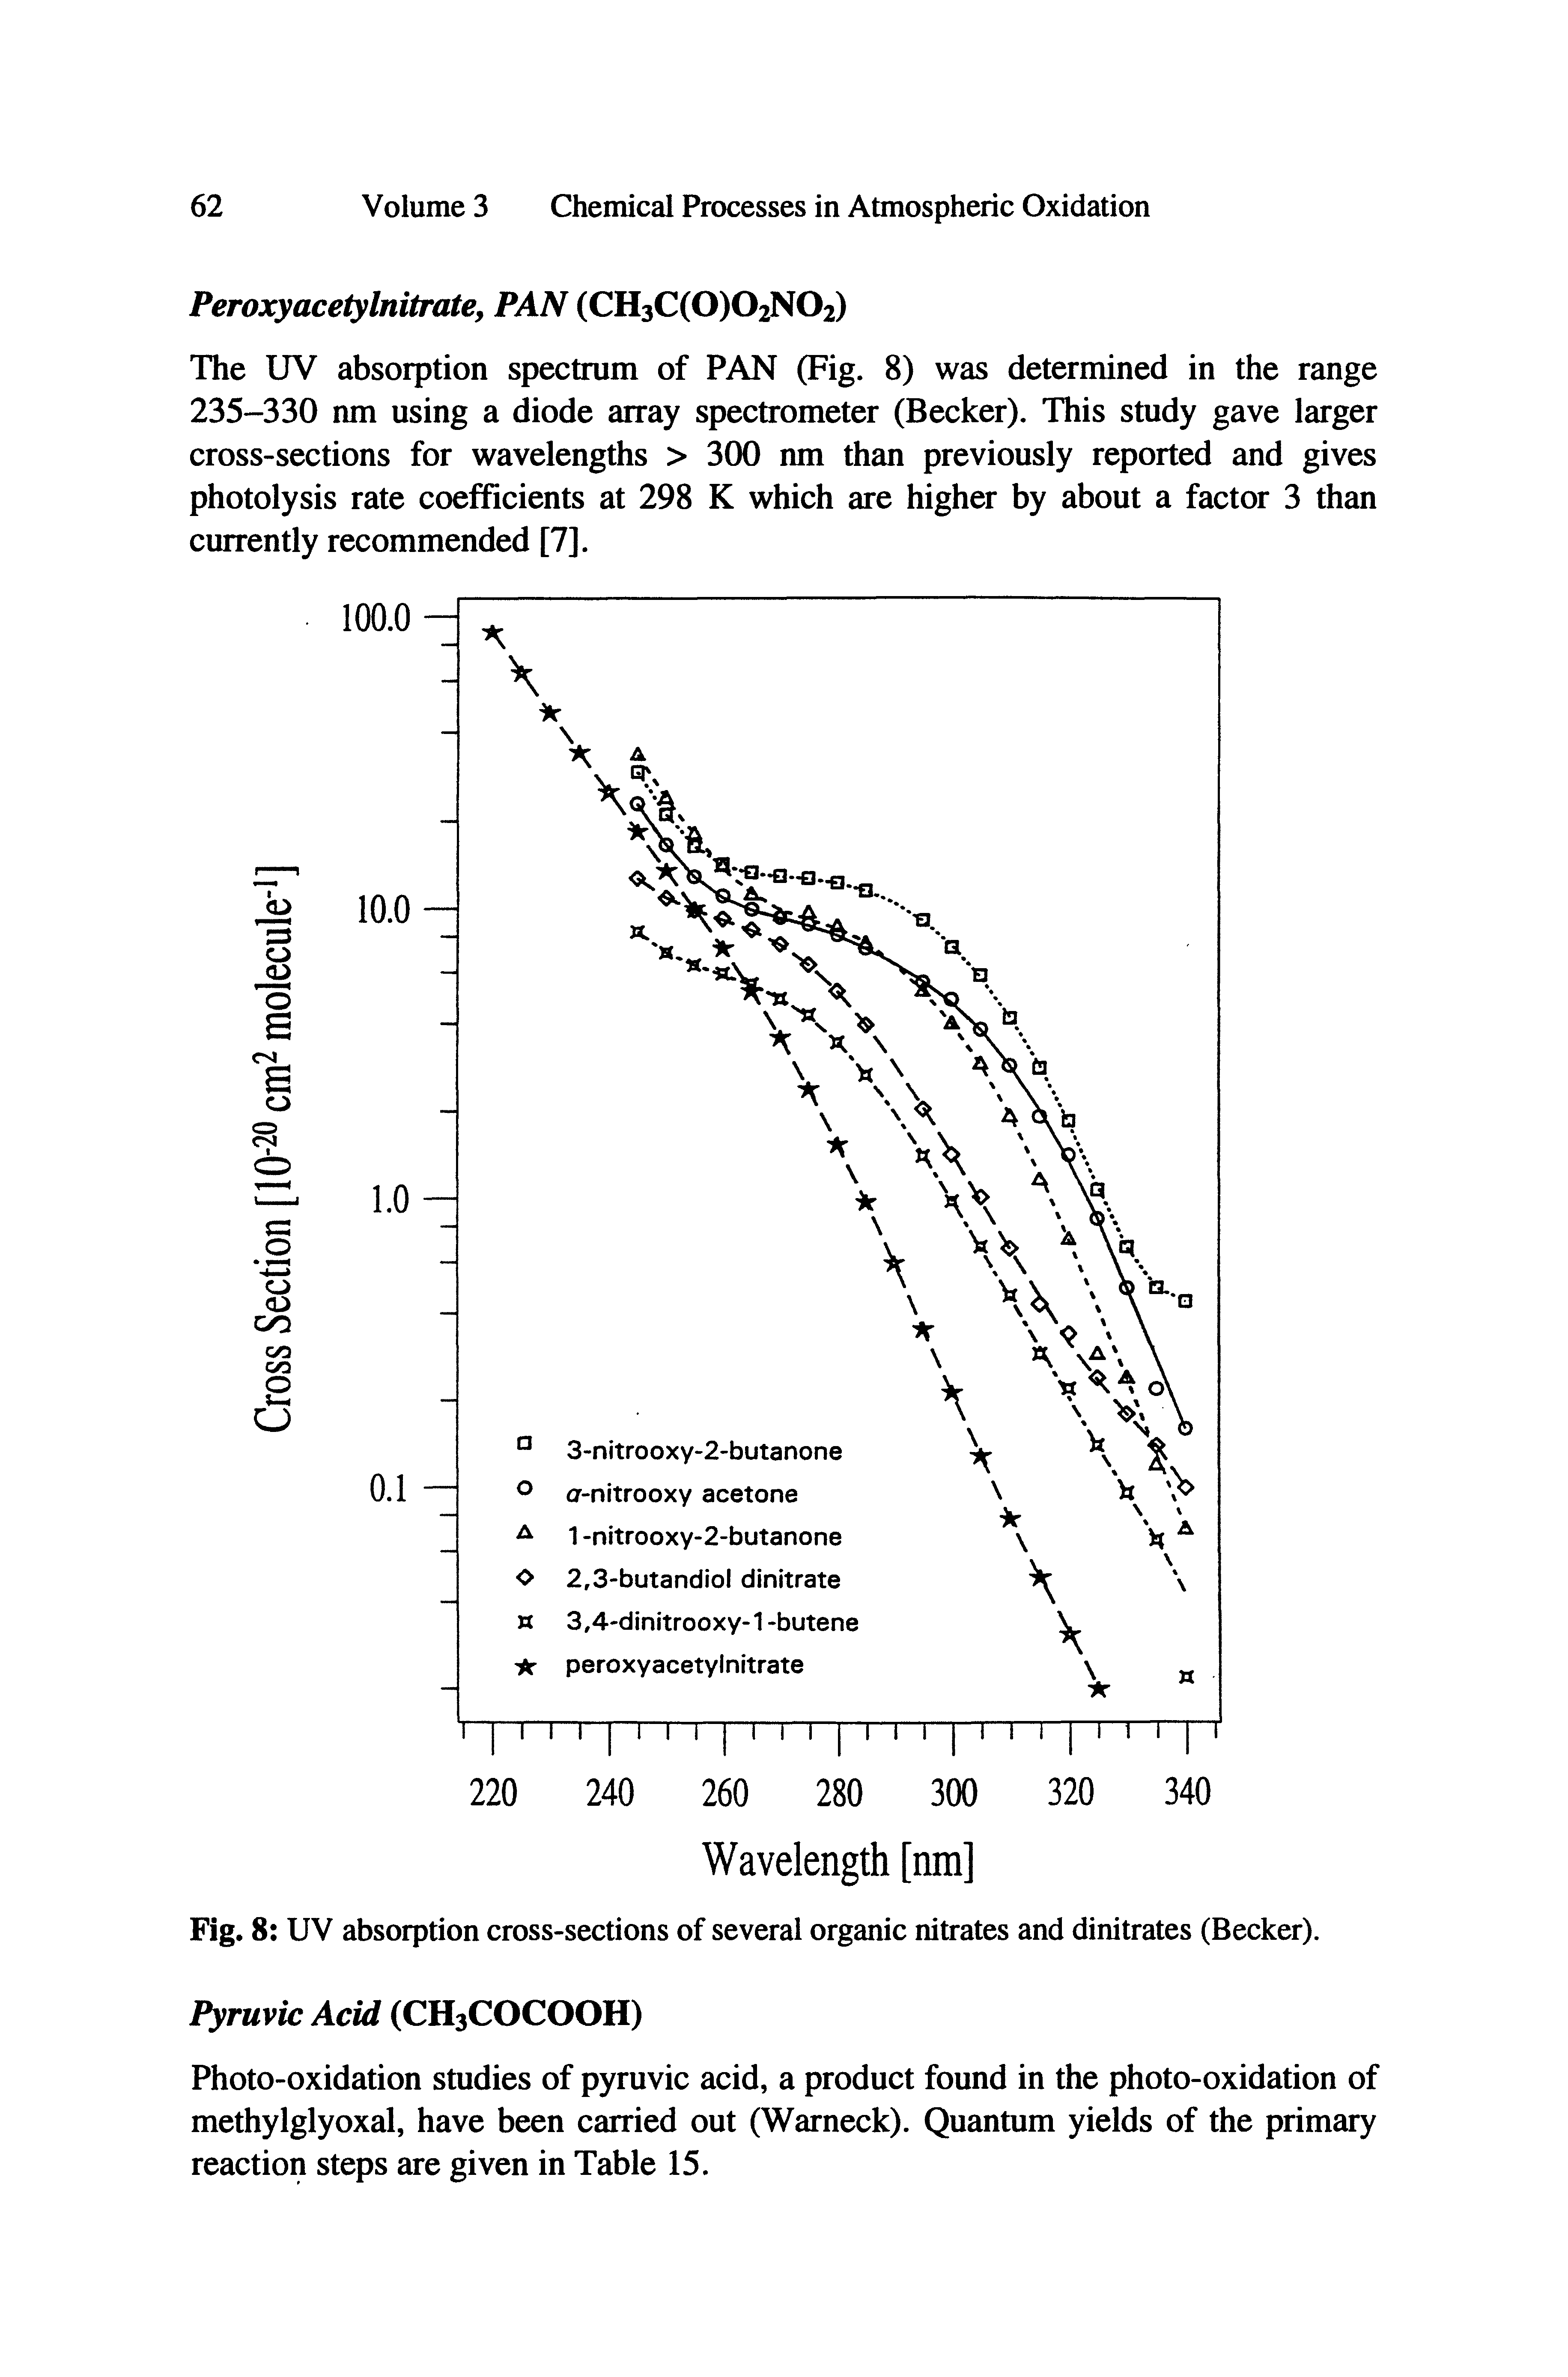 Fig. 8 UV absorption cross-sections of several organic nitrates and dinitrates (Becker). Pyruvic Acid (CH3COCOOH)...